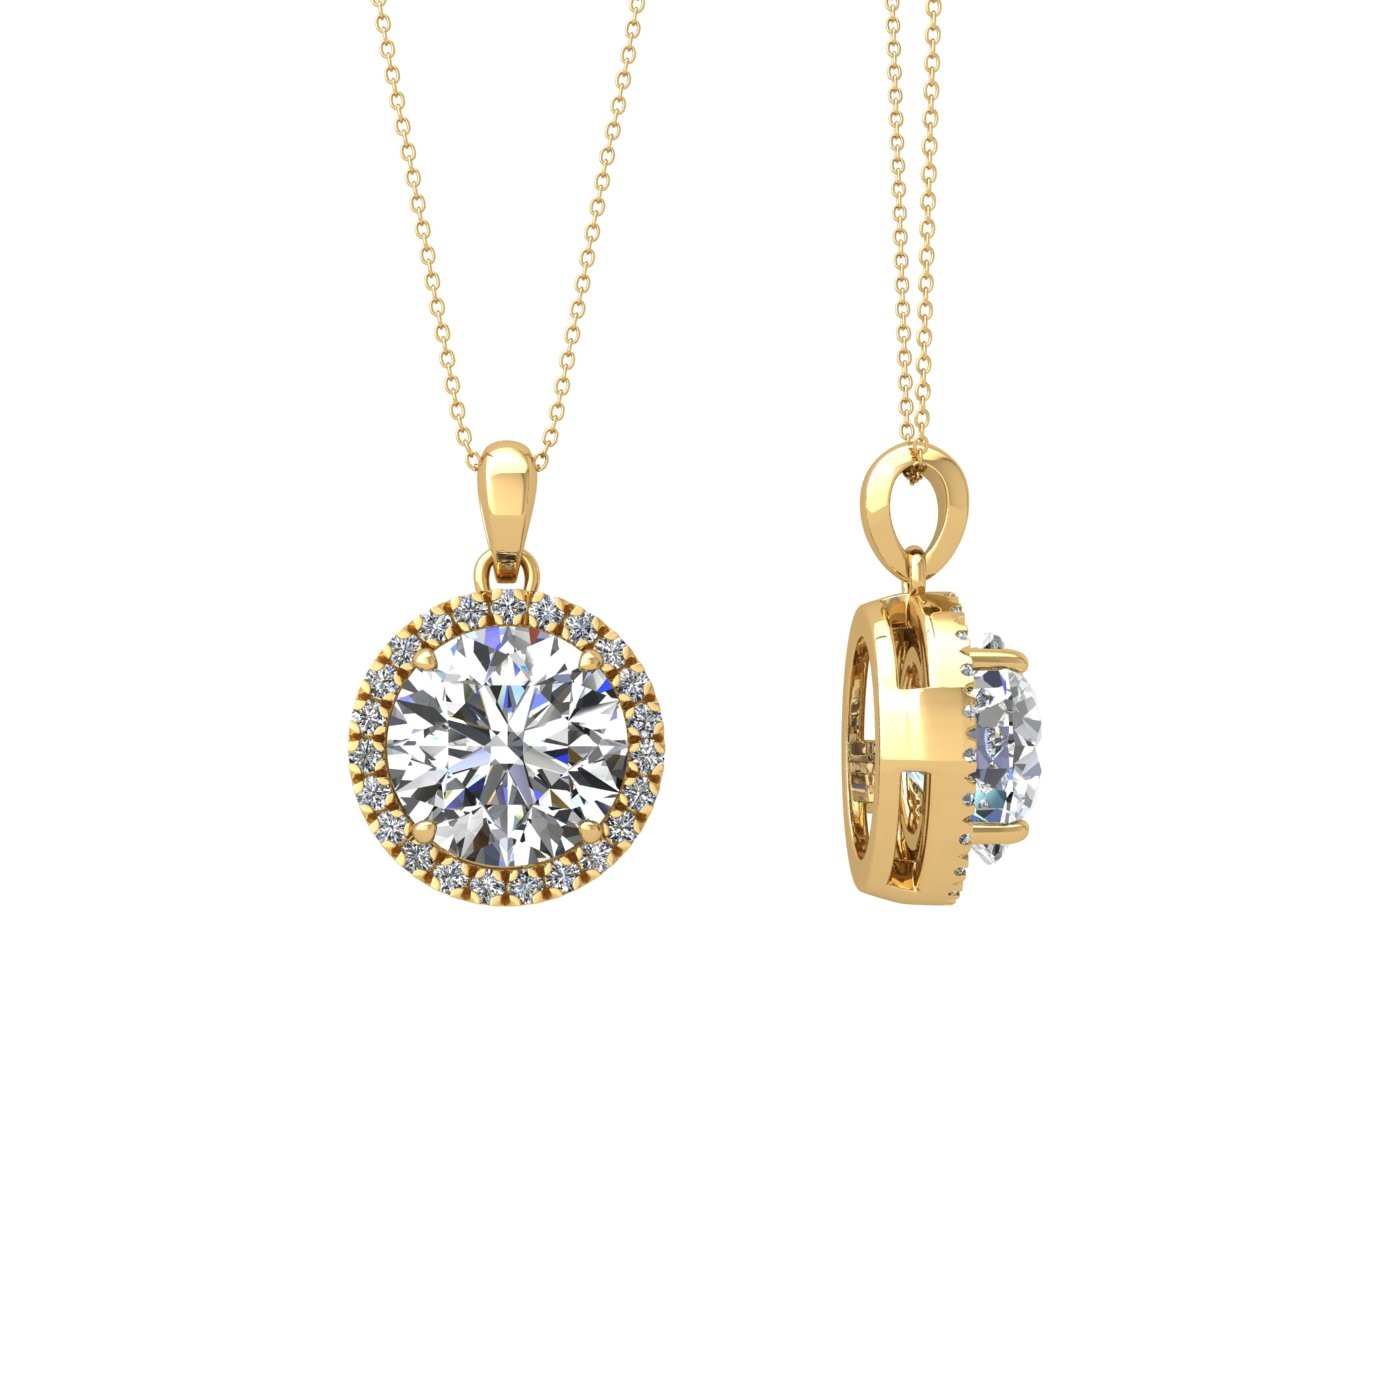 18k yellow gold  0,5 ct 4 prong round shape diamond pendant with diamond pavÉ set halo including chain seperate from the pendant